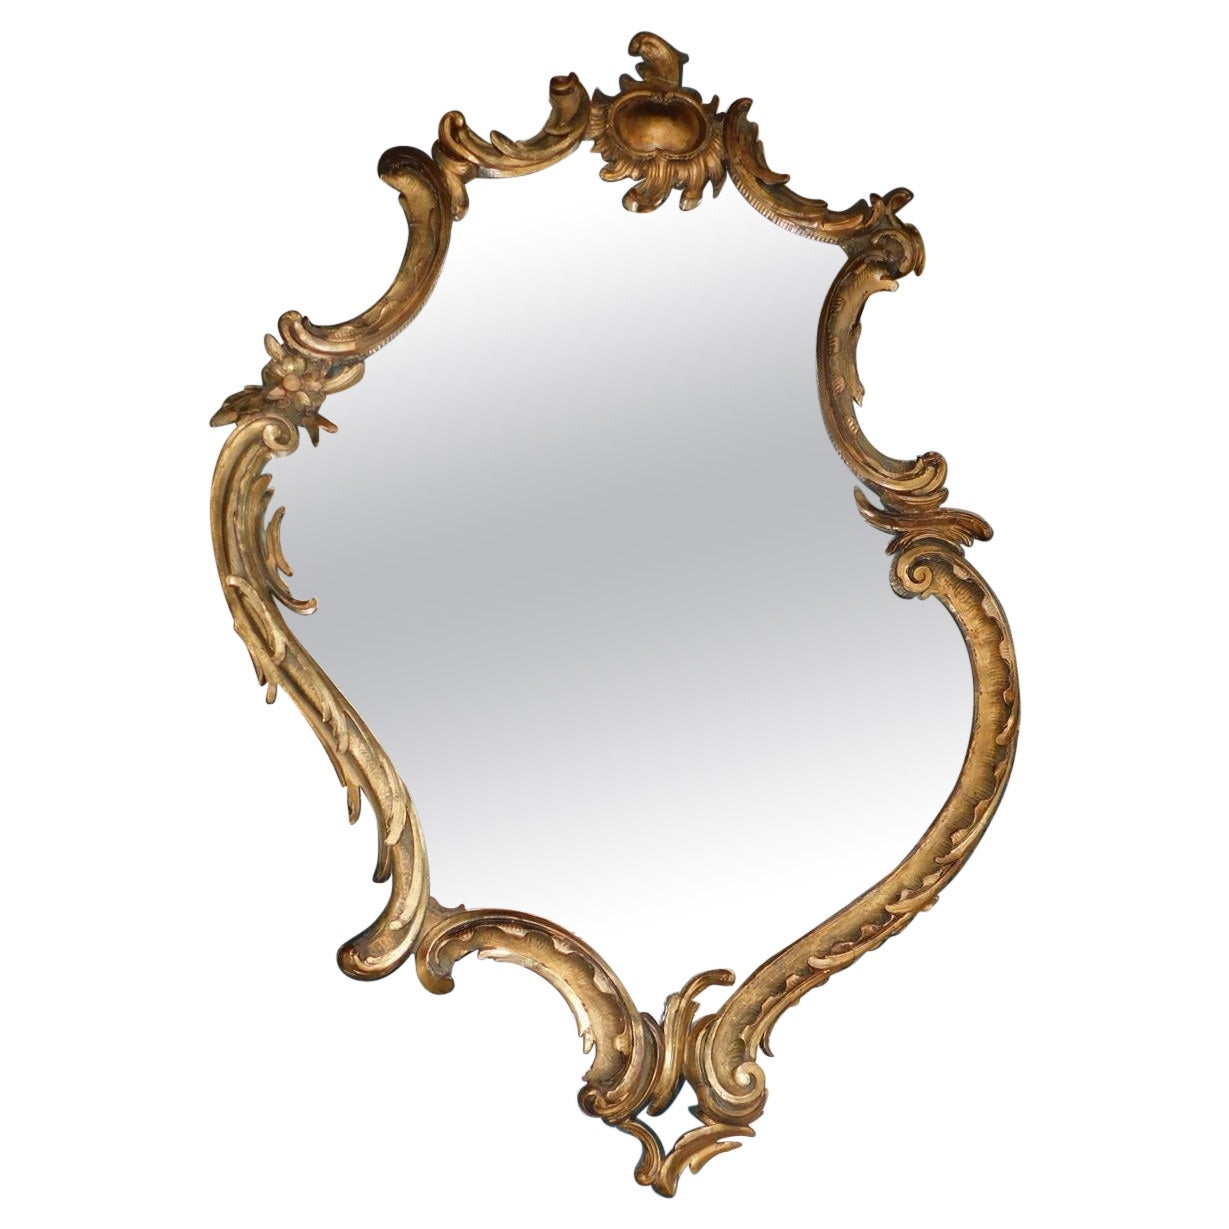 English Chippendale Serpentine Gilt Wood and Gesso Foliage Wall Mirror, C. 1780 For Sale